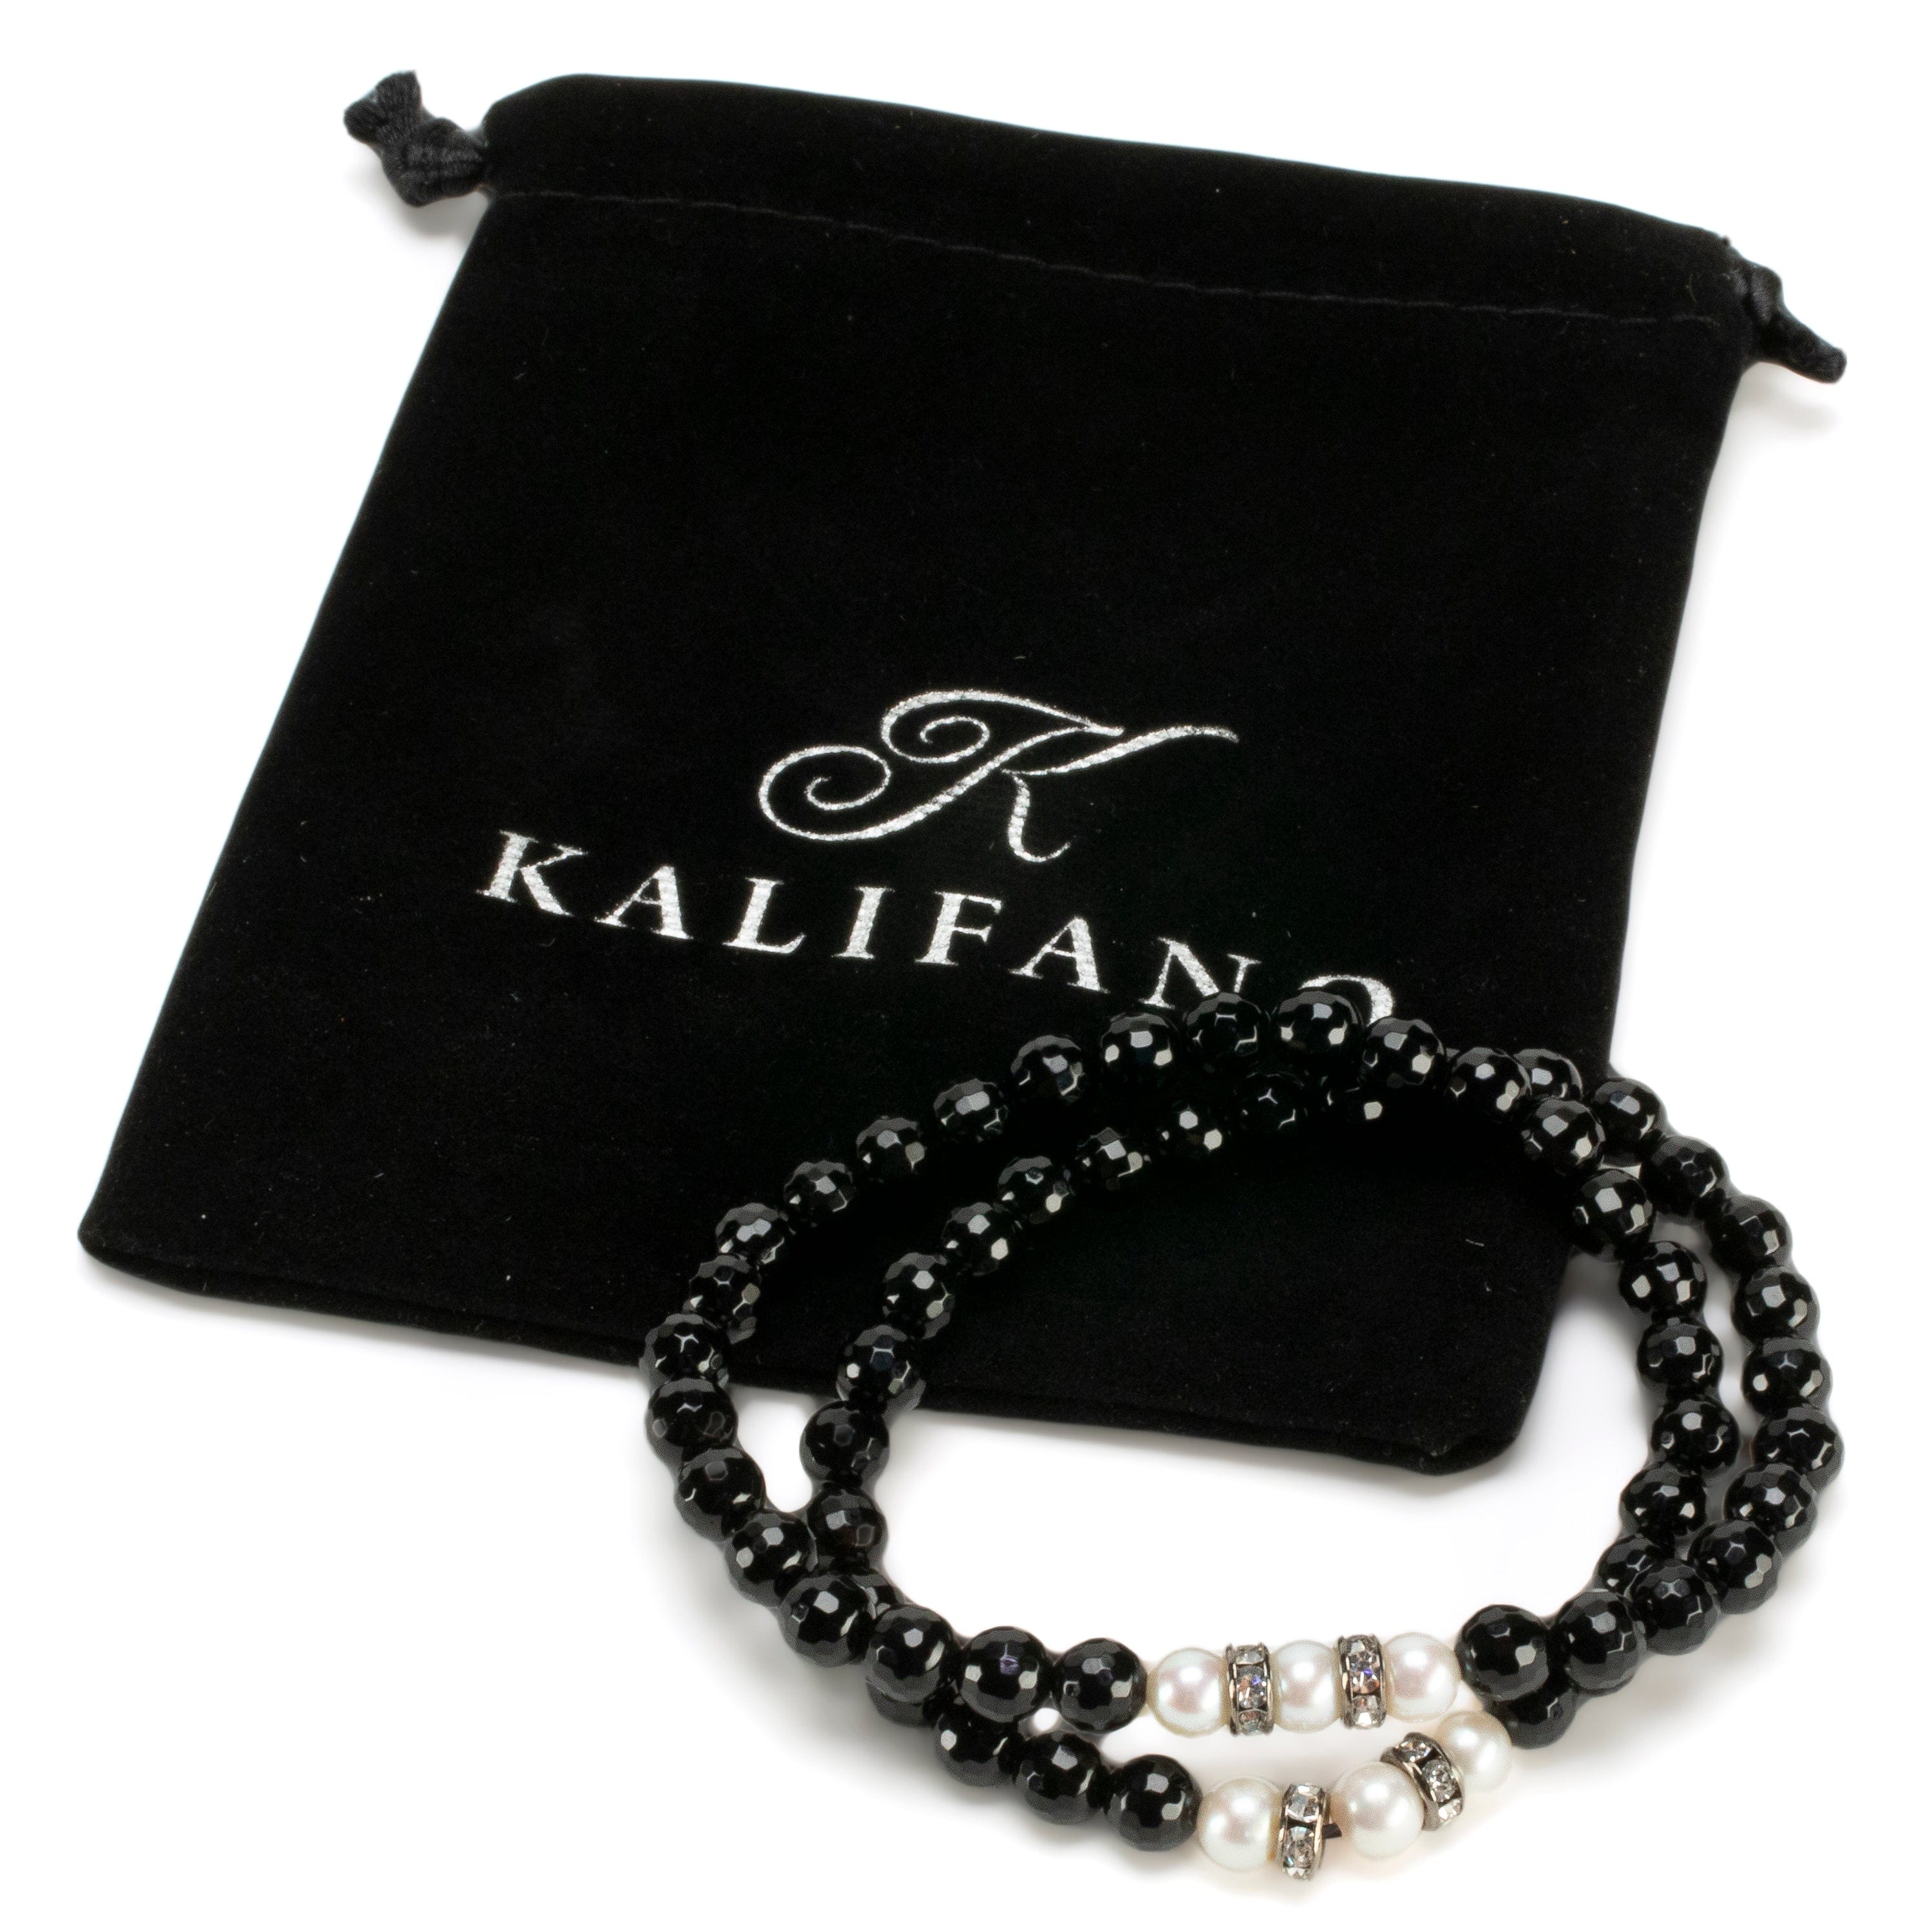 Kalifano Gemstone Bracelets Faceted Black Agate 6mm Beads with Pearl & Silver Accent Beads Double Wrap Elastic Gemstone Bracelet WHITE-BGI2-043